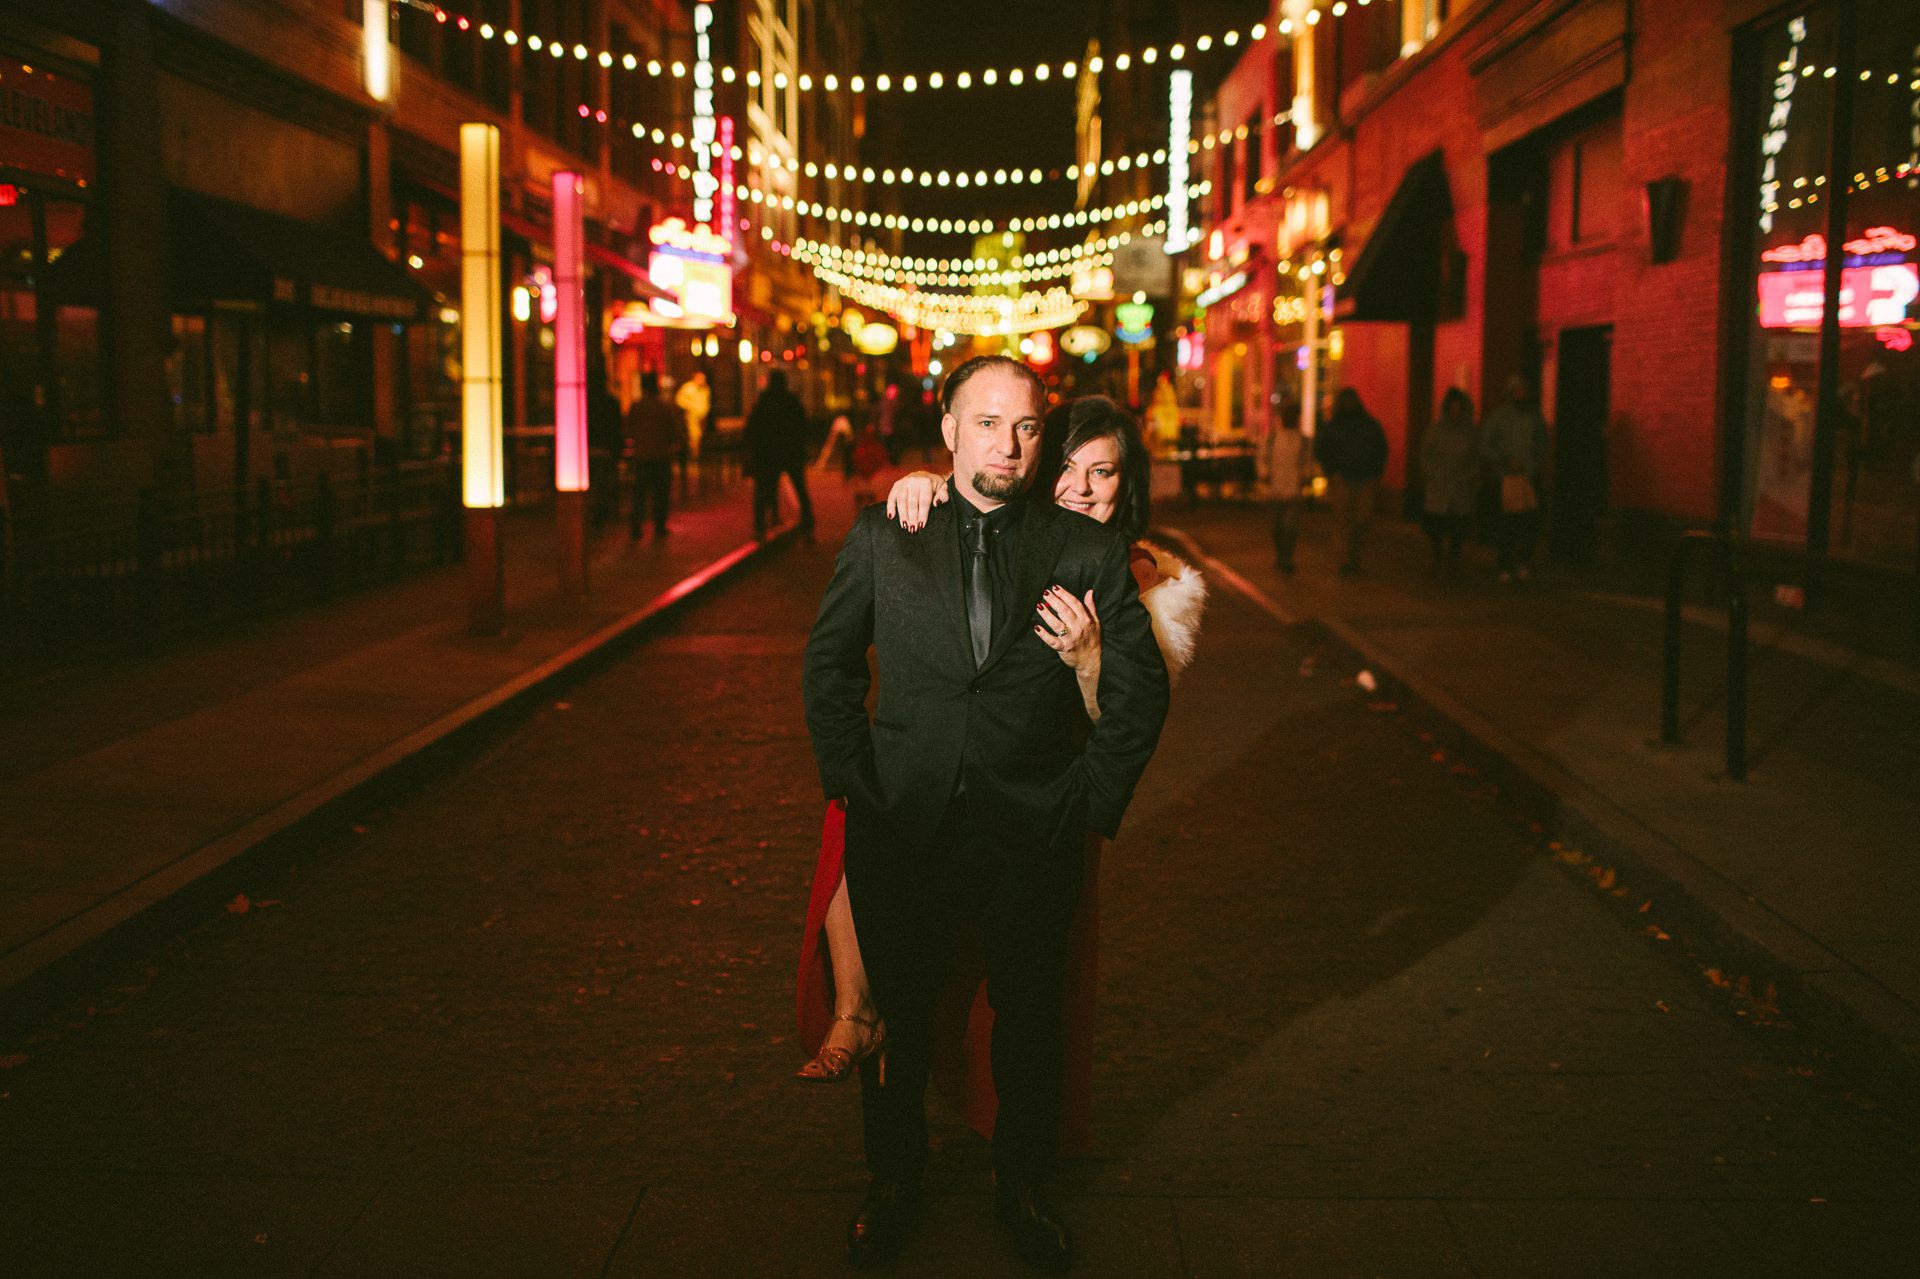 House of Blues Wedding Photographer in Downtown Cleveland 2 43.jpg